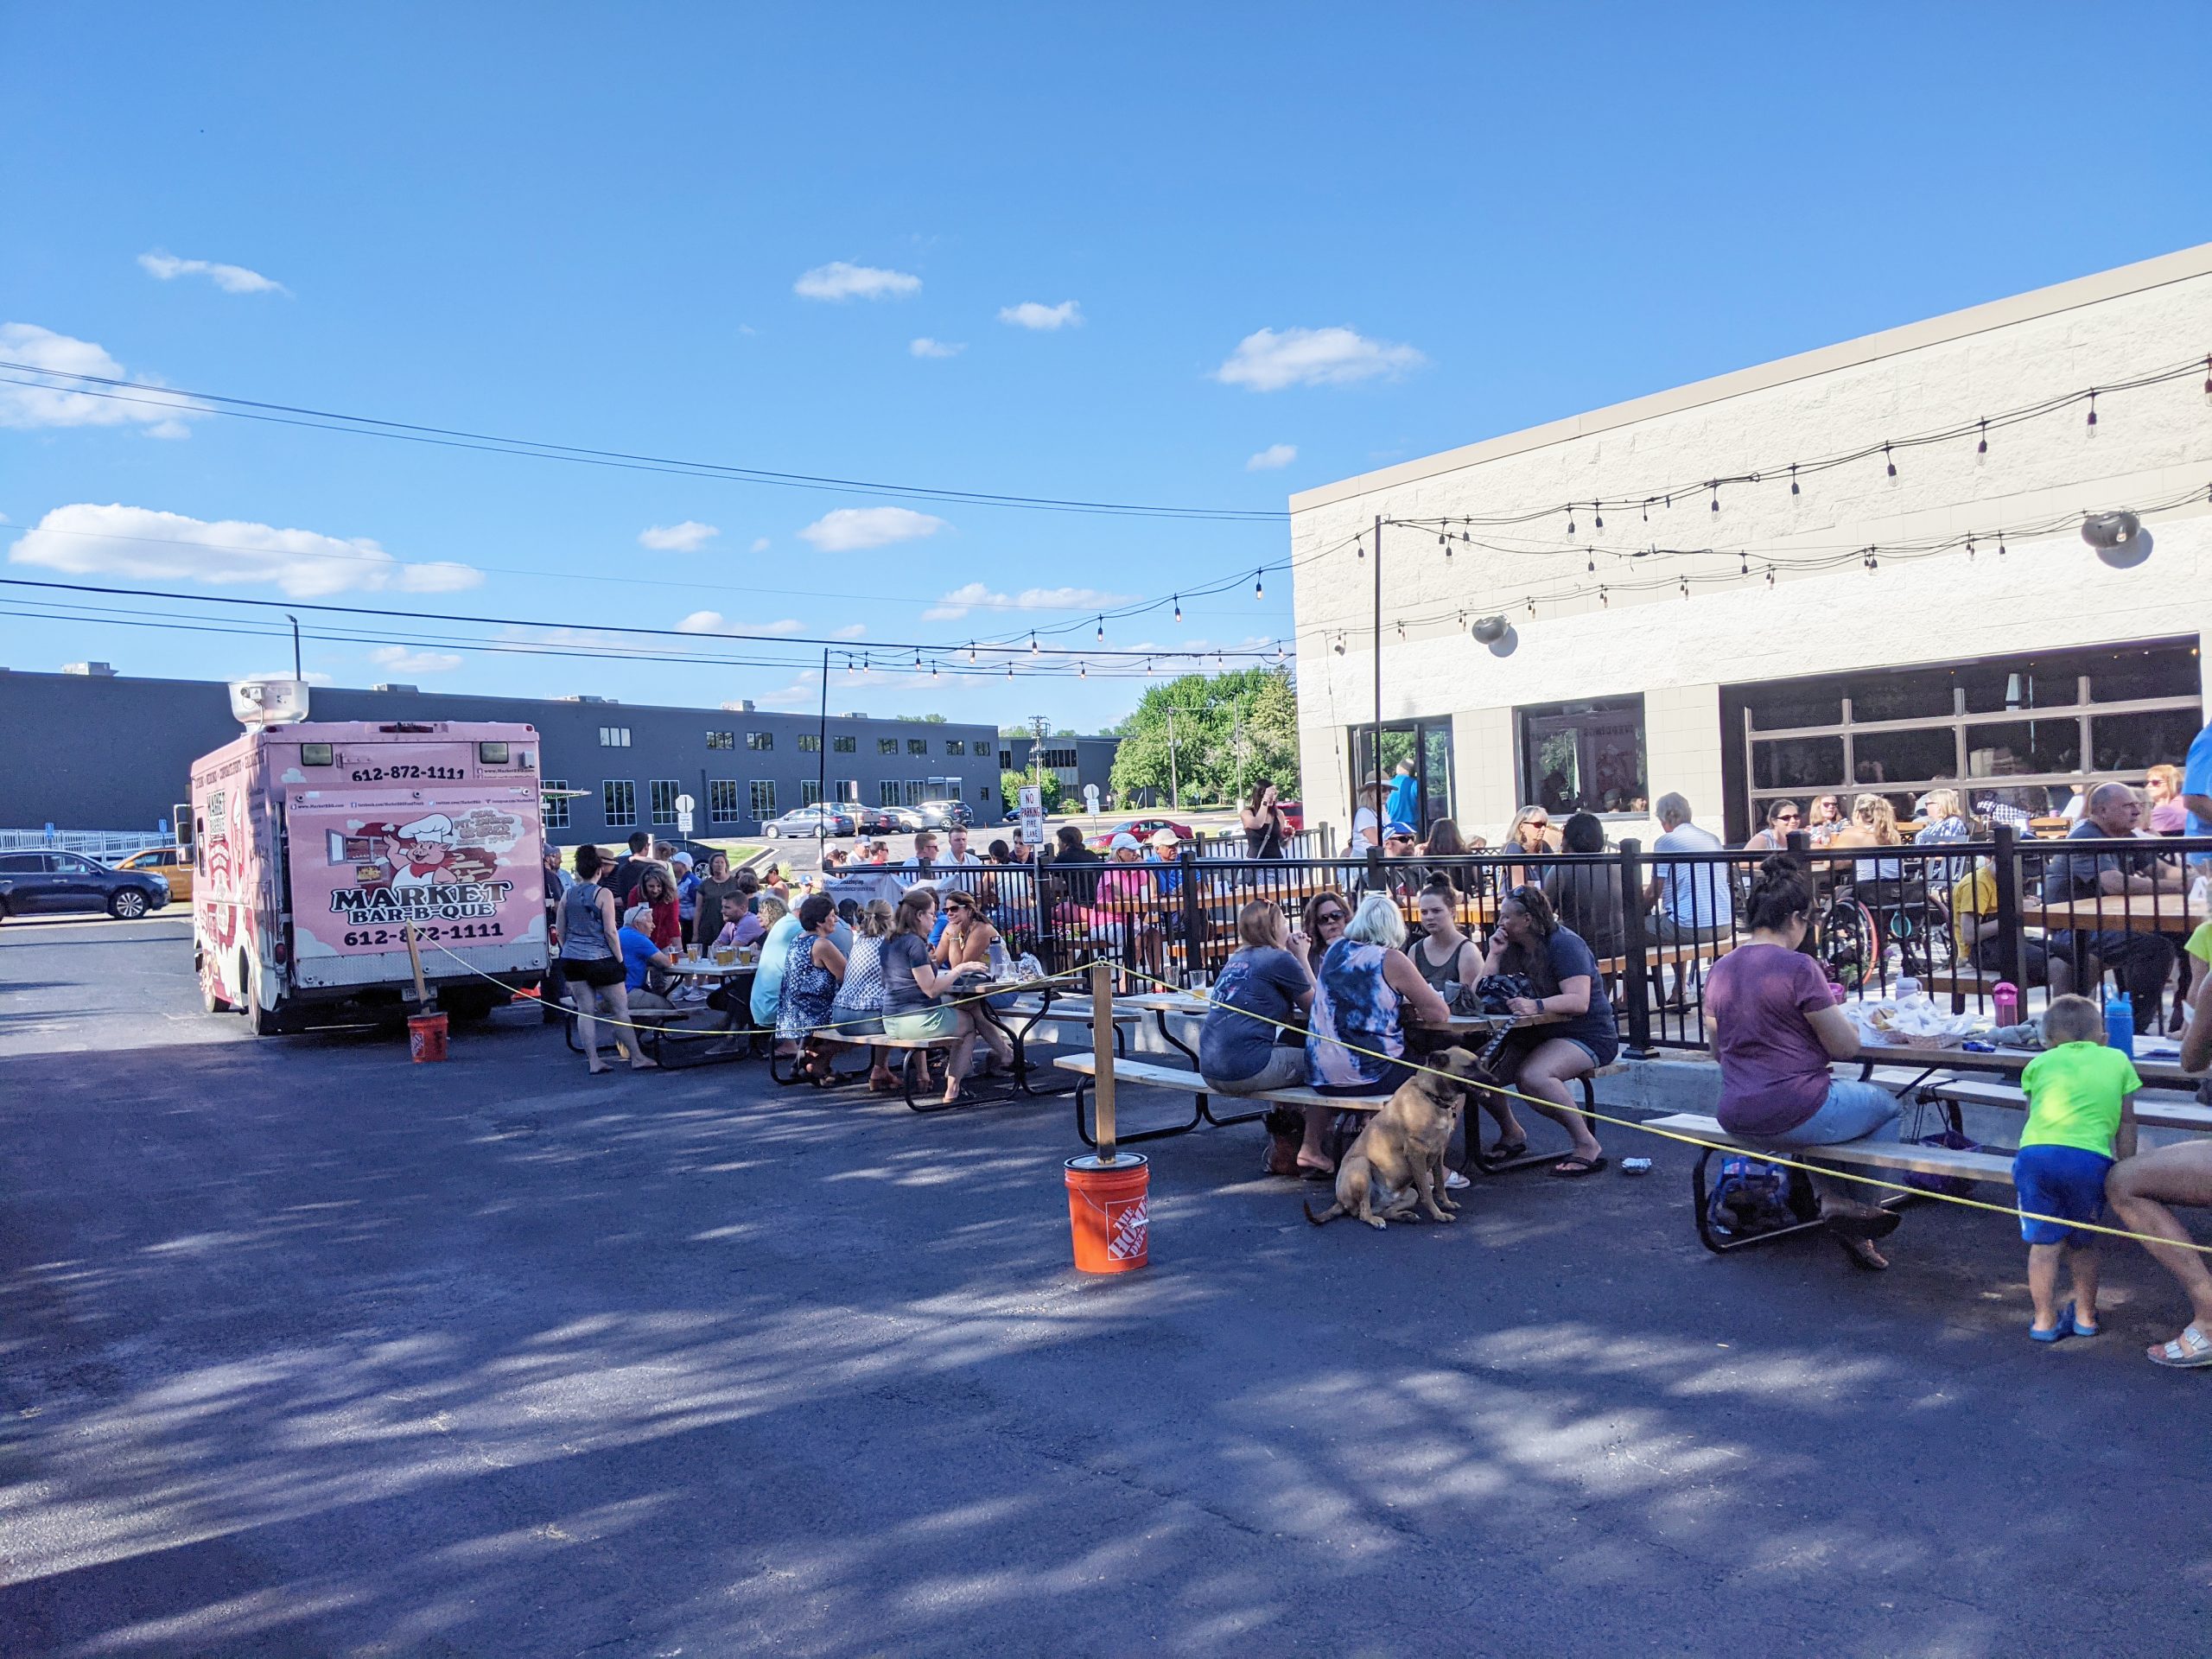 Crowd on business patio with food truck